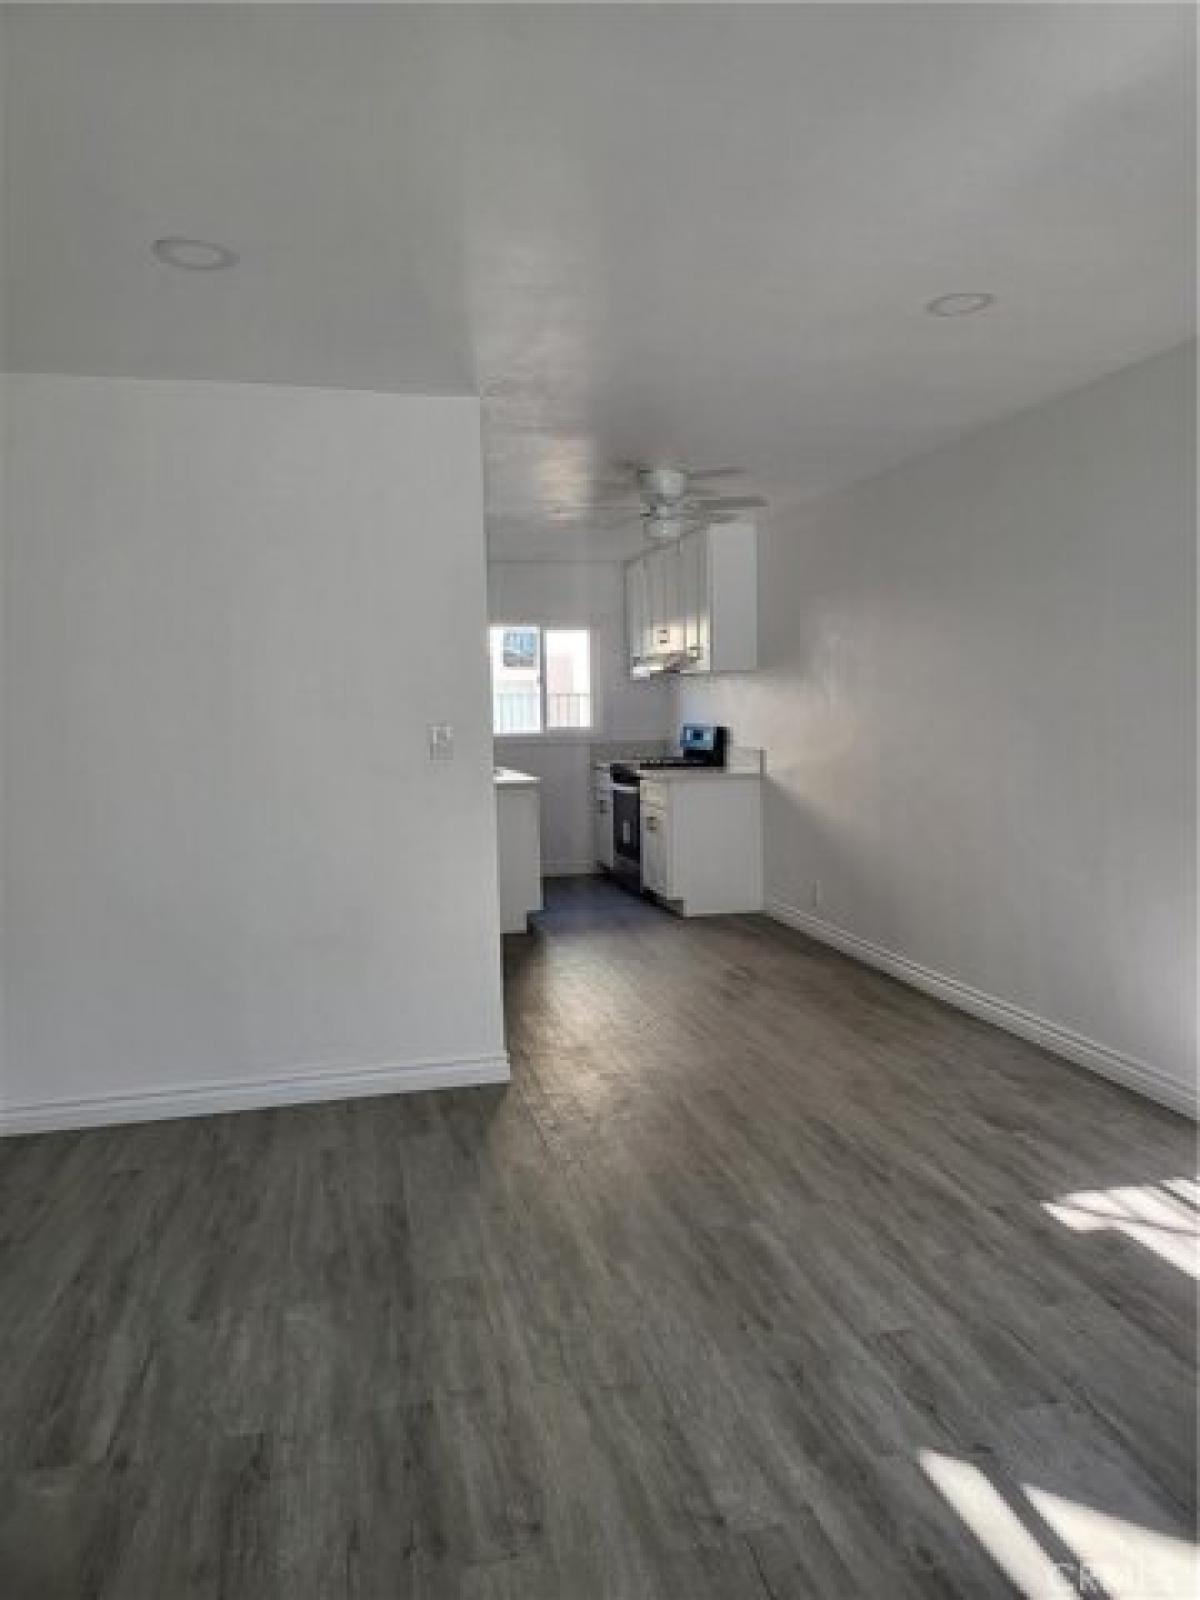 Picture of Apartment For Rent in Fullerton, California, United States